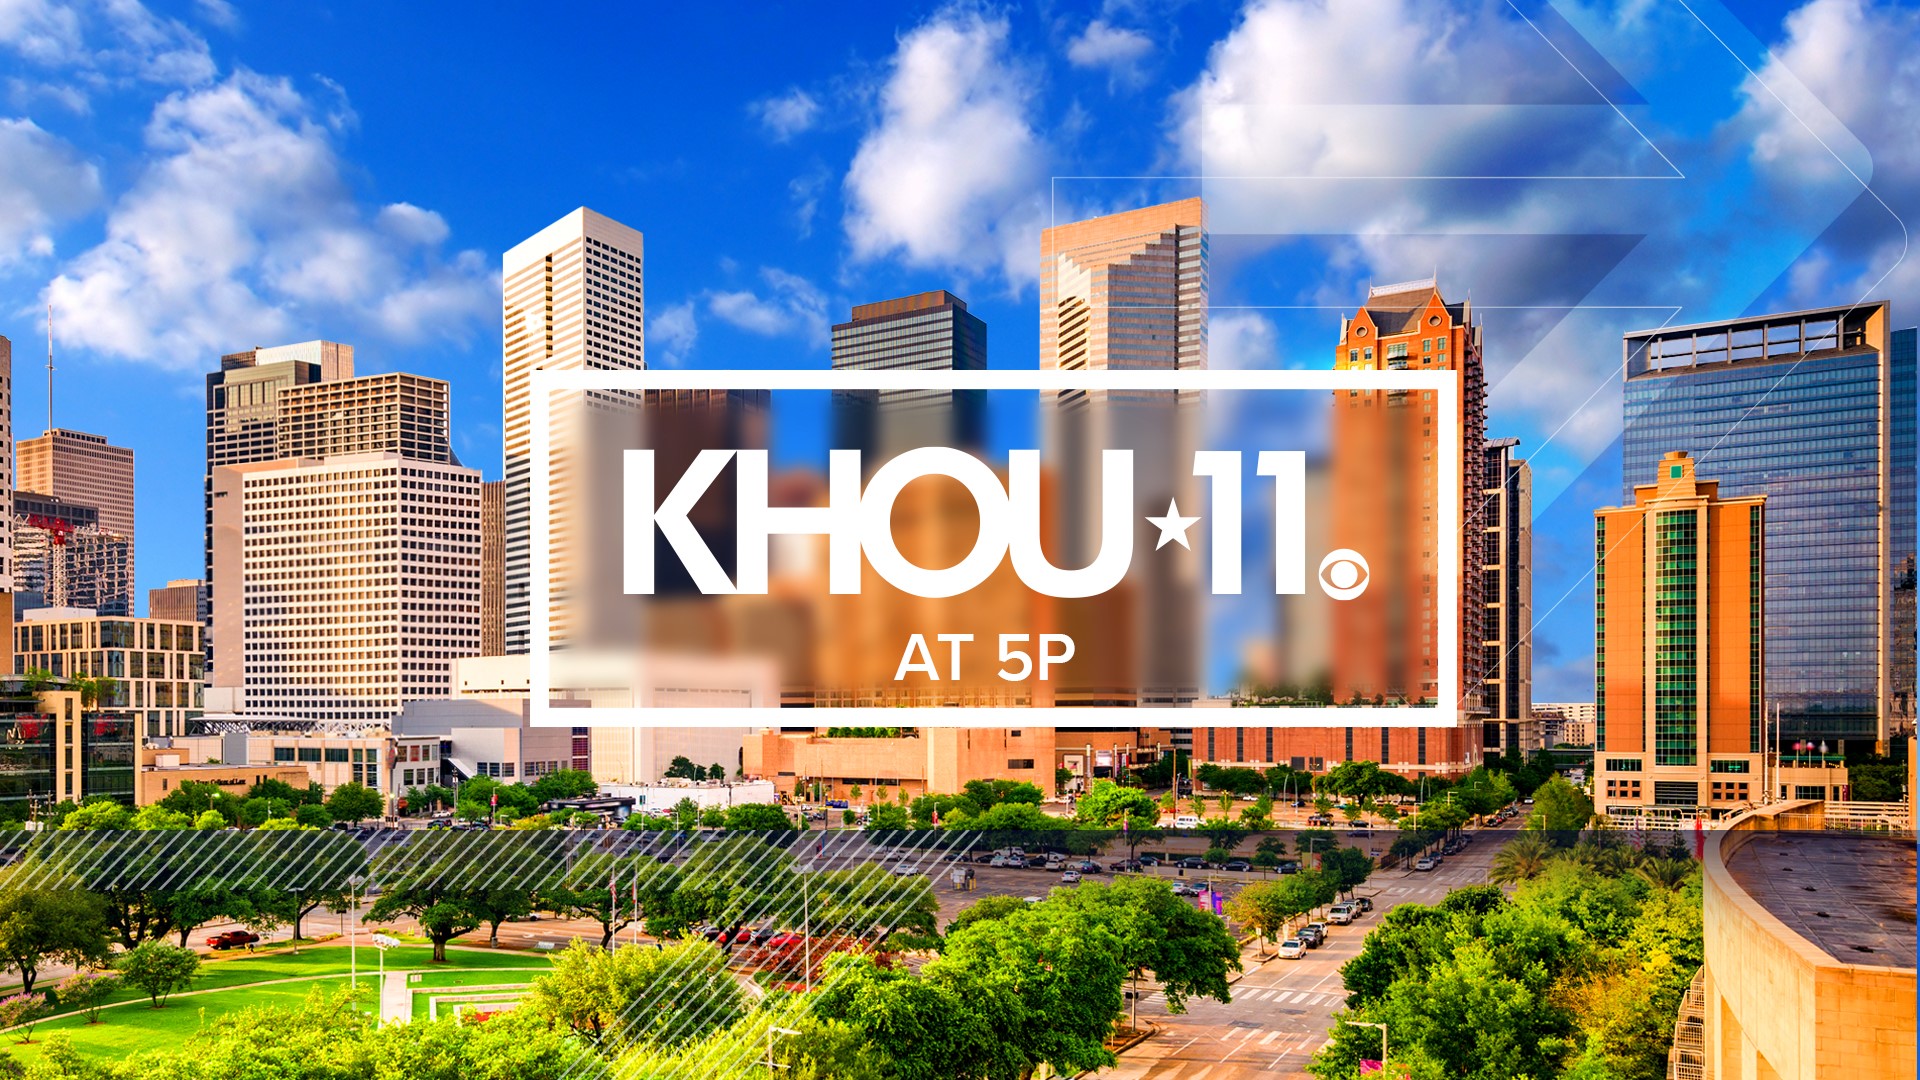 KHOU 11 News is the place for Houston news, weather and events in your neighborhood. That's how KHOU Stands for Houston. Your stories get told on KHOU 11 News.